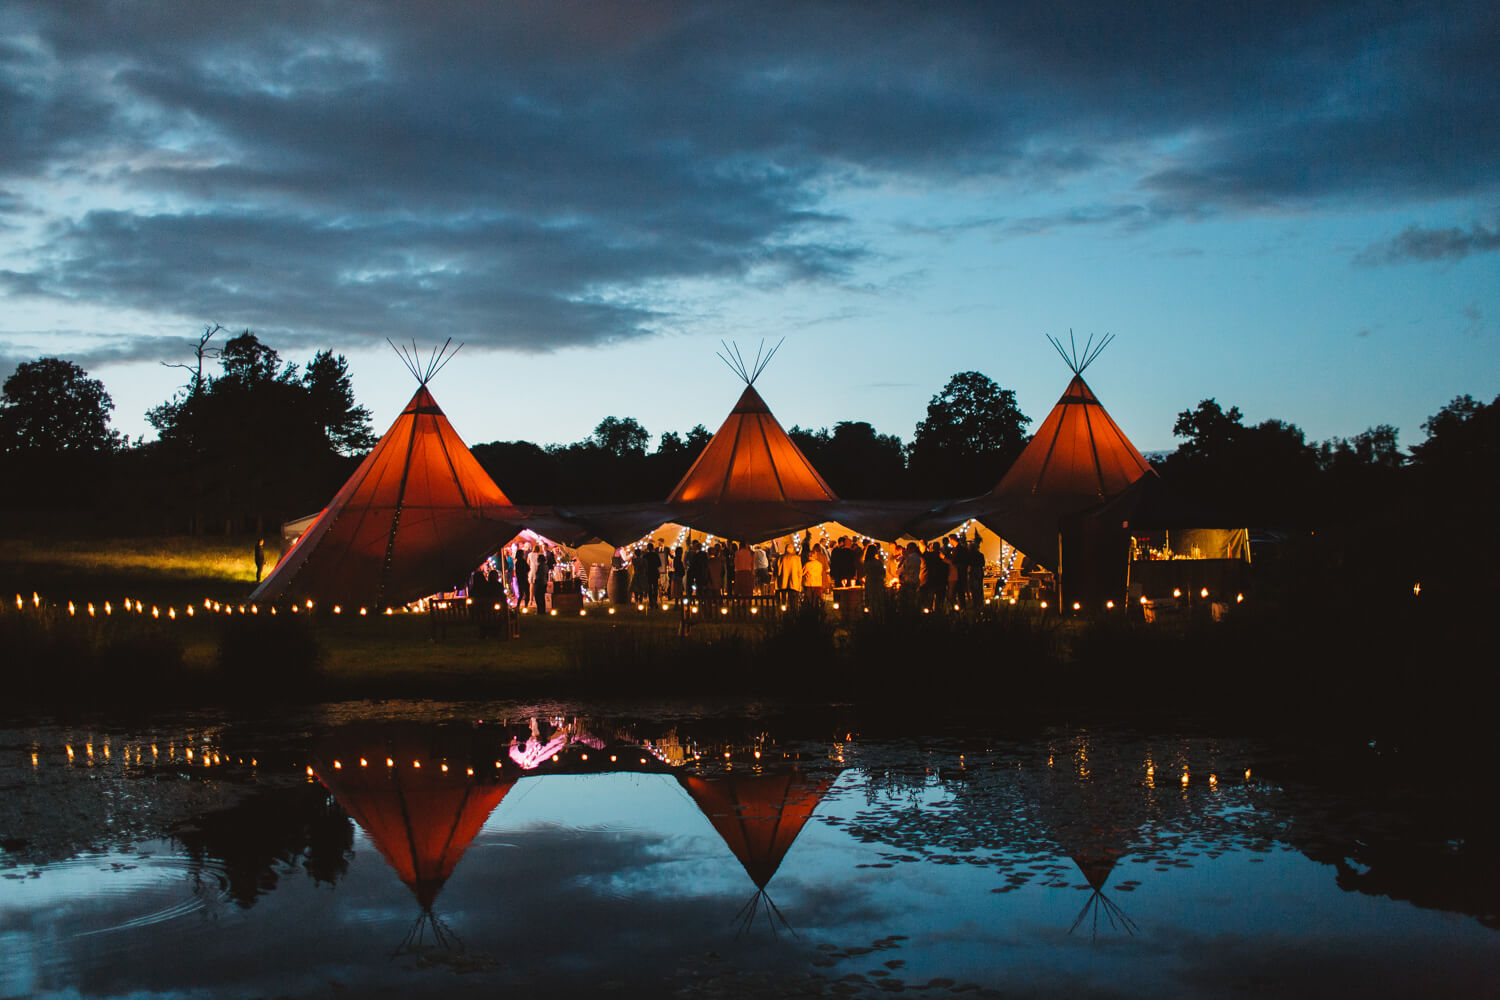 Image of marquee tents in a field at night